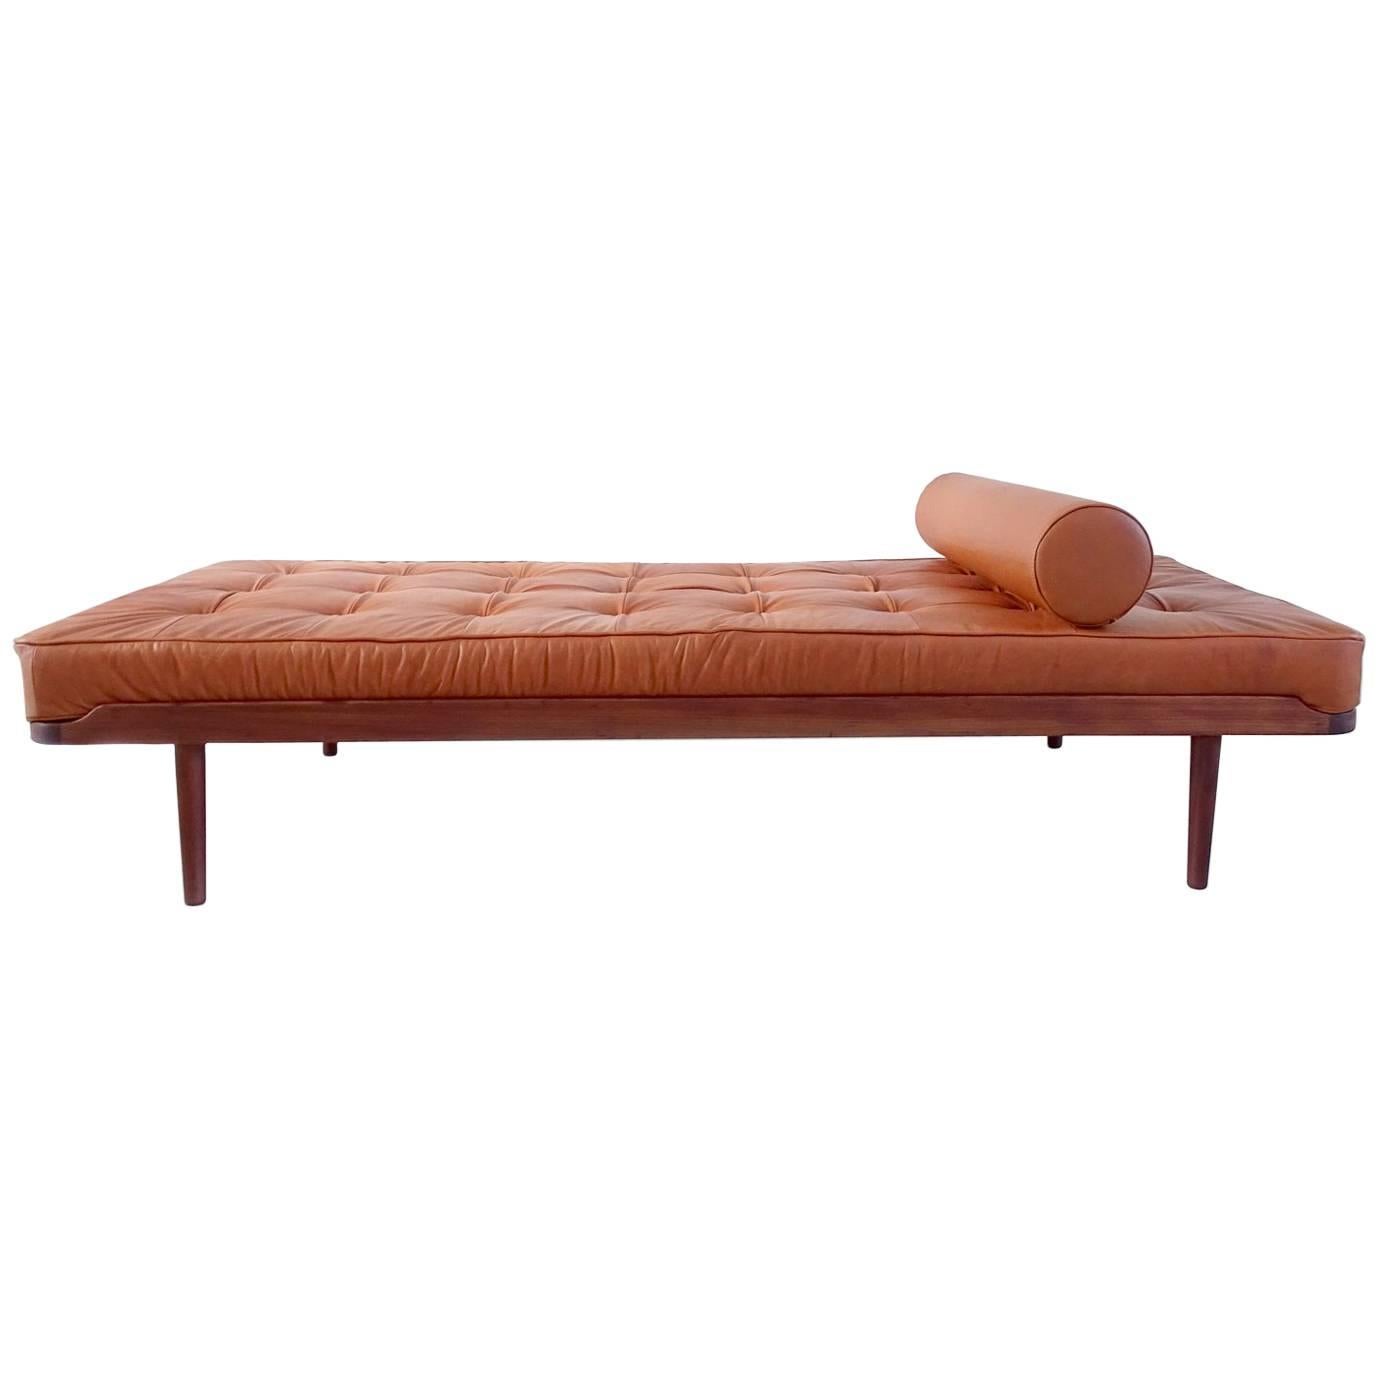 Grete Jalk Daybed in Teak and Cognac Leather for P. Jeppesen, Denmark, 1960 For Sale